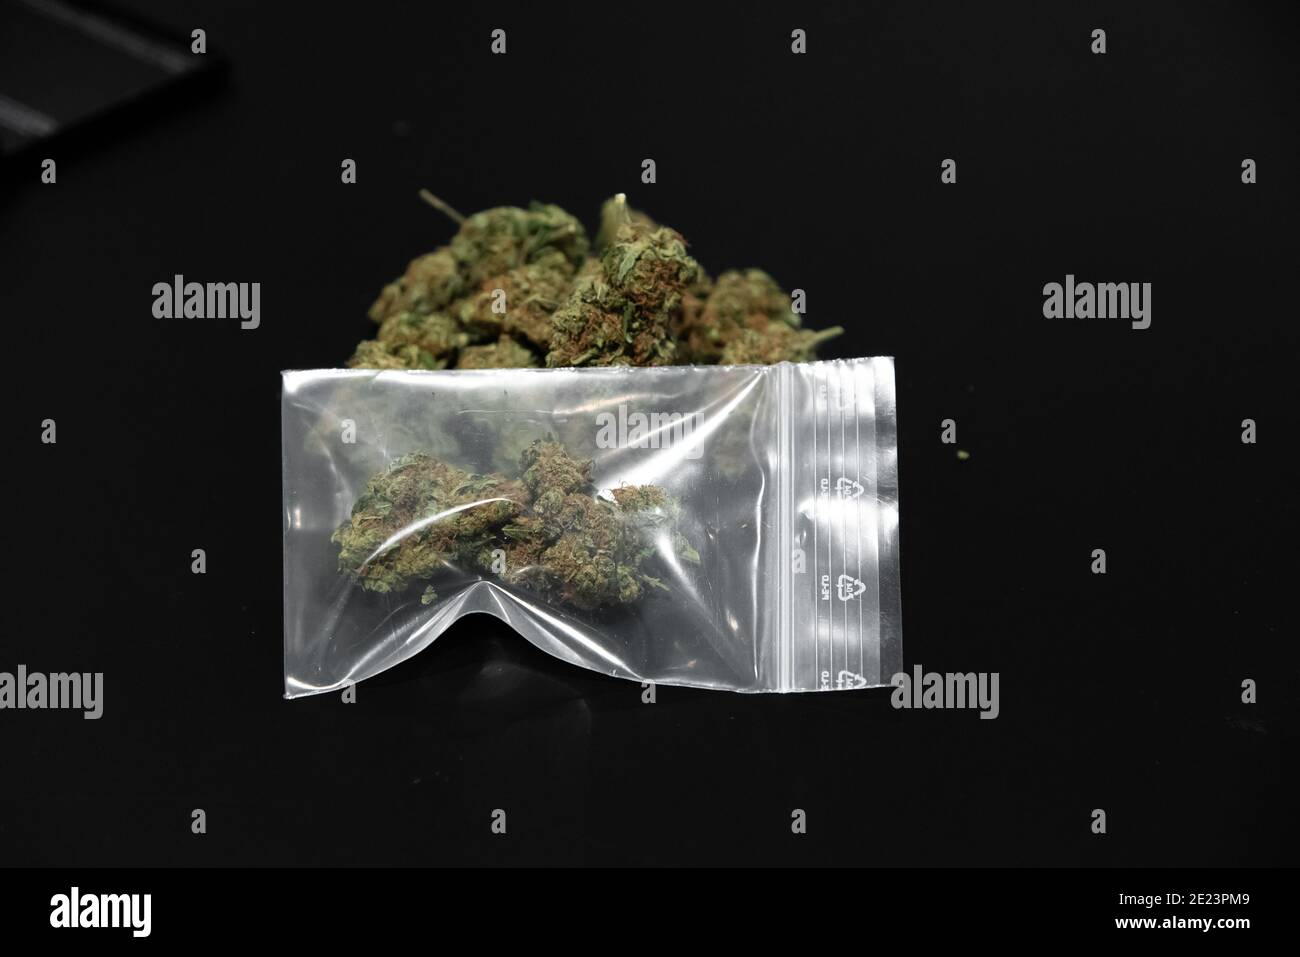 https://c8.alamy.com/comp/2E23PM9/closeup-of-cannabis-buds-in-a-plastic-bag-on-the-table-with-a-blurred-background-2E23PM9.jpg